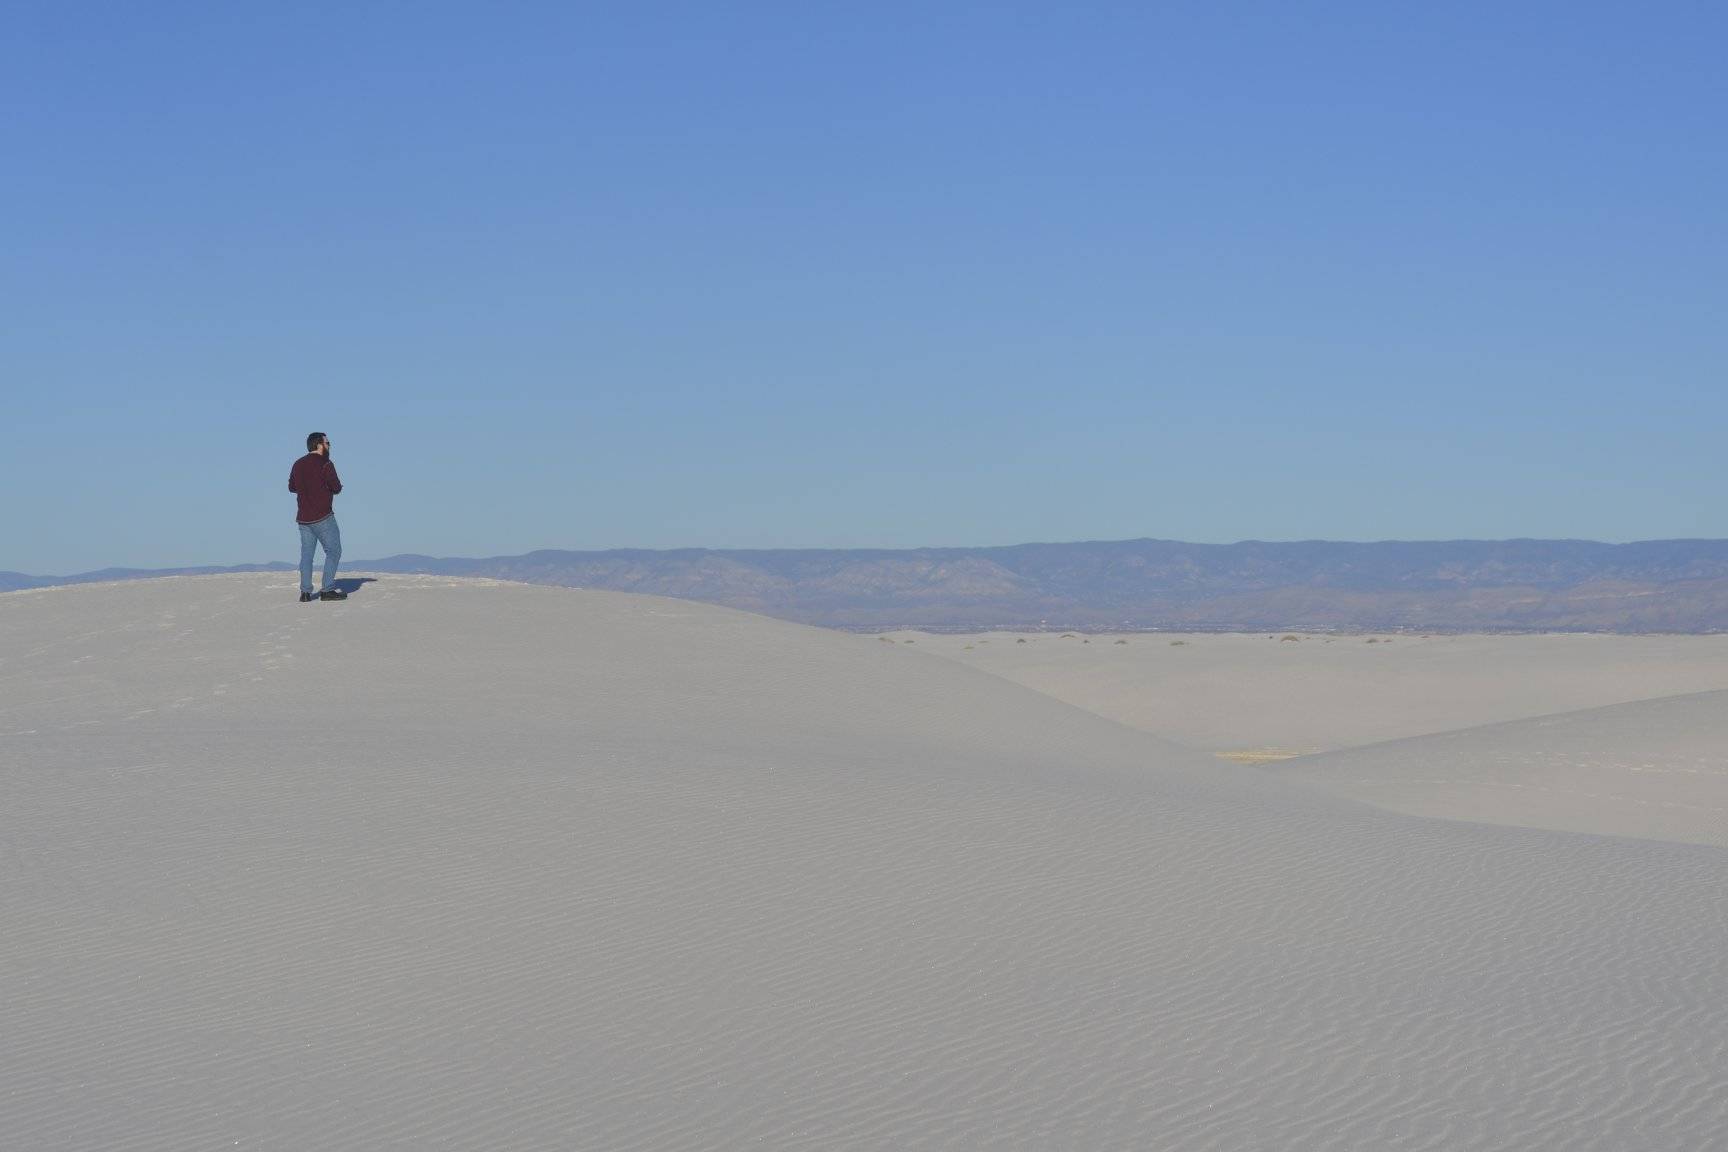 Nate on the dunes at White Sands National Monument in New, Mexico. (Photo by Victoria Petersen/Peninsula Clarion)